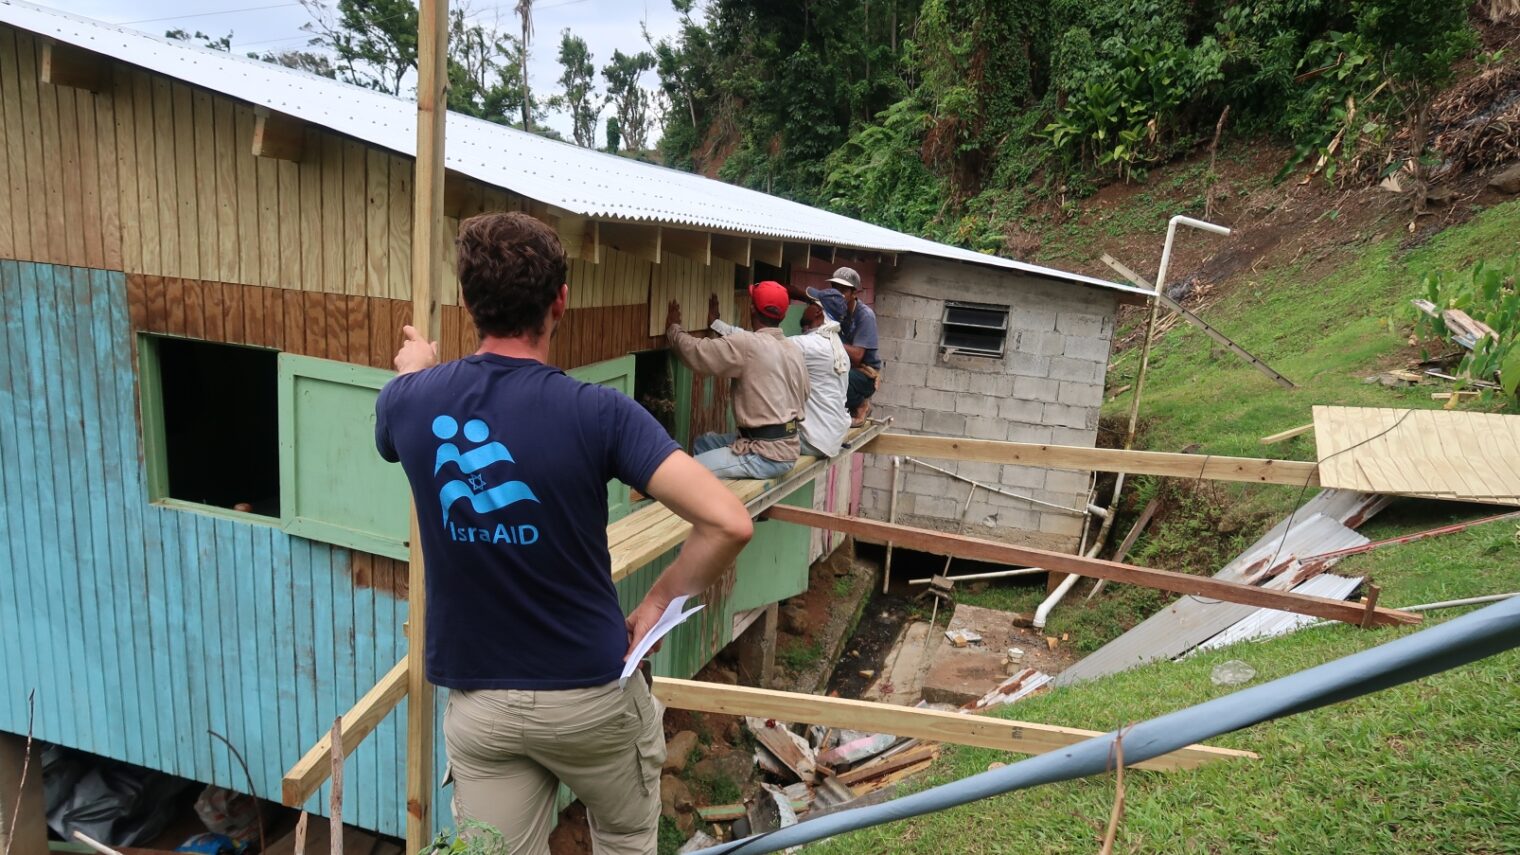 An IsraAID staffer oversees construction of a shelter in Dominica. Photo: courtesy